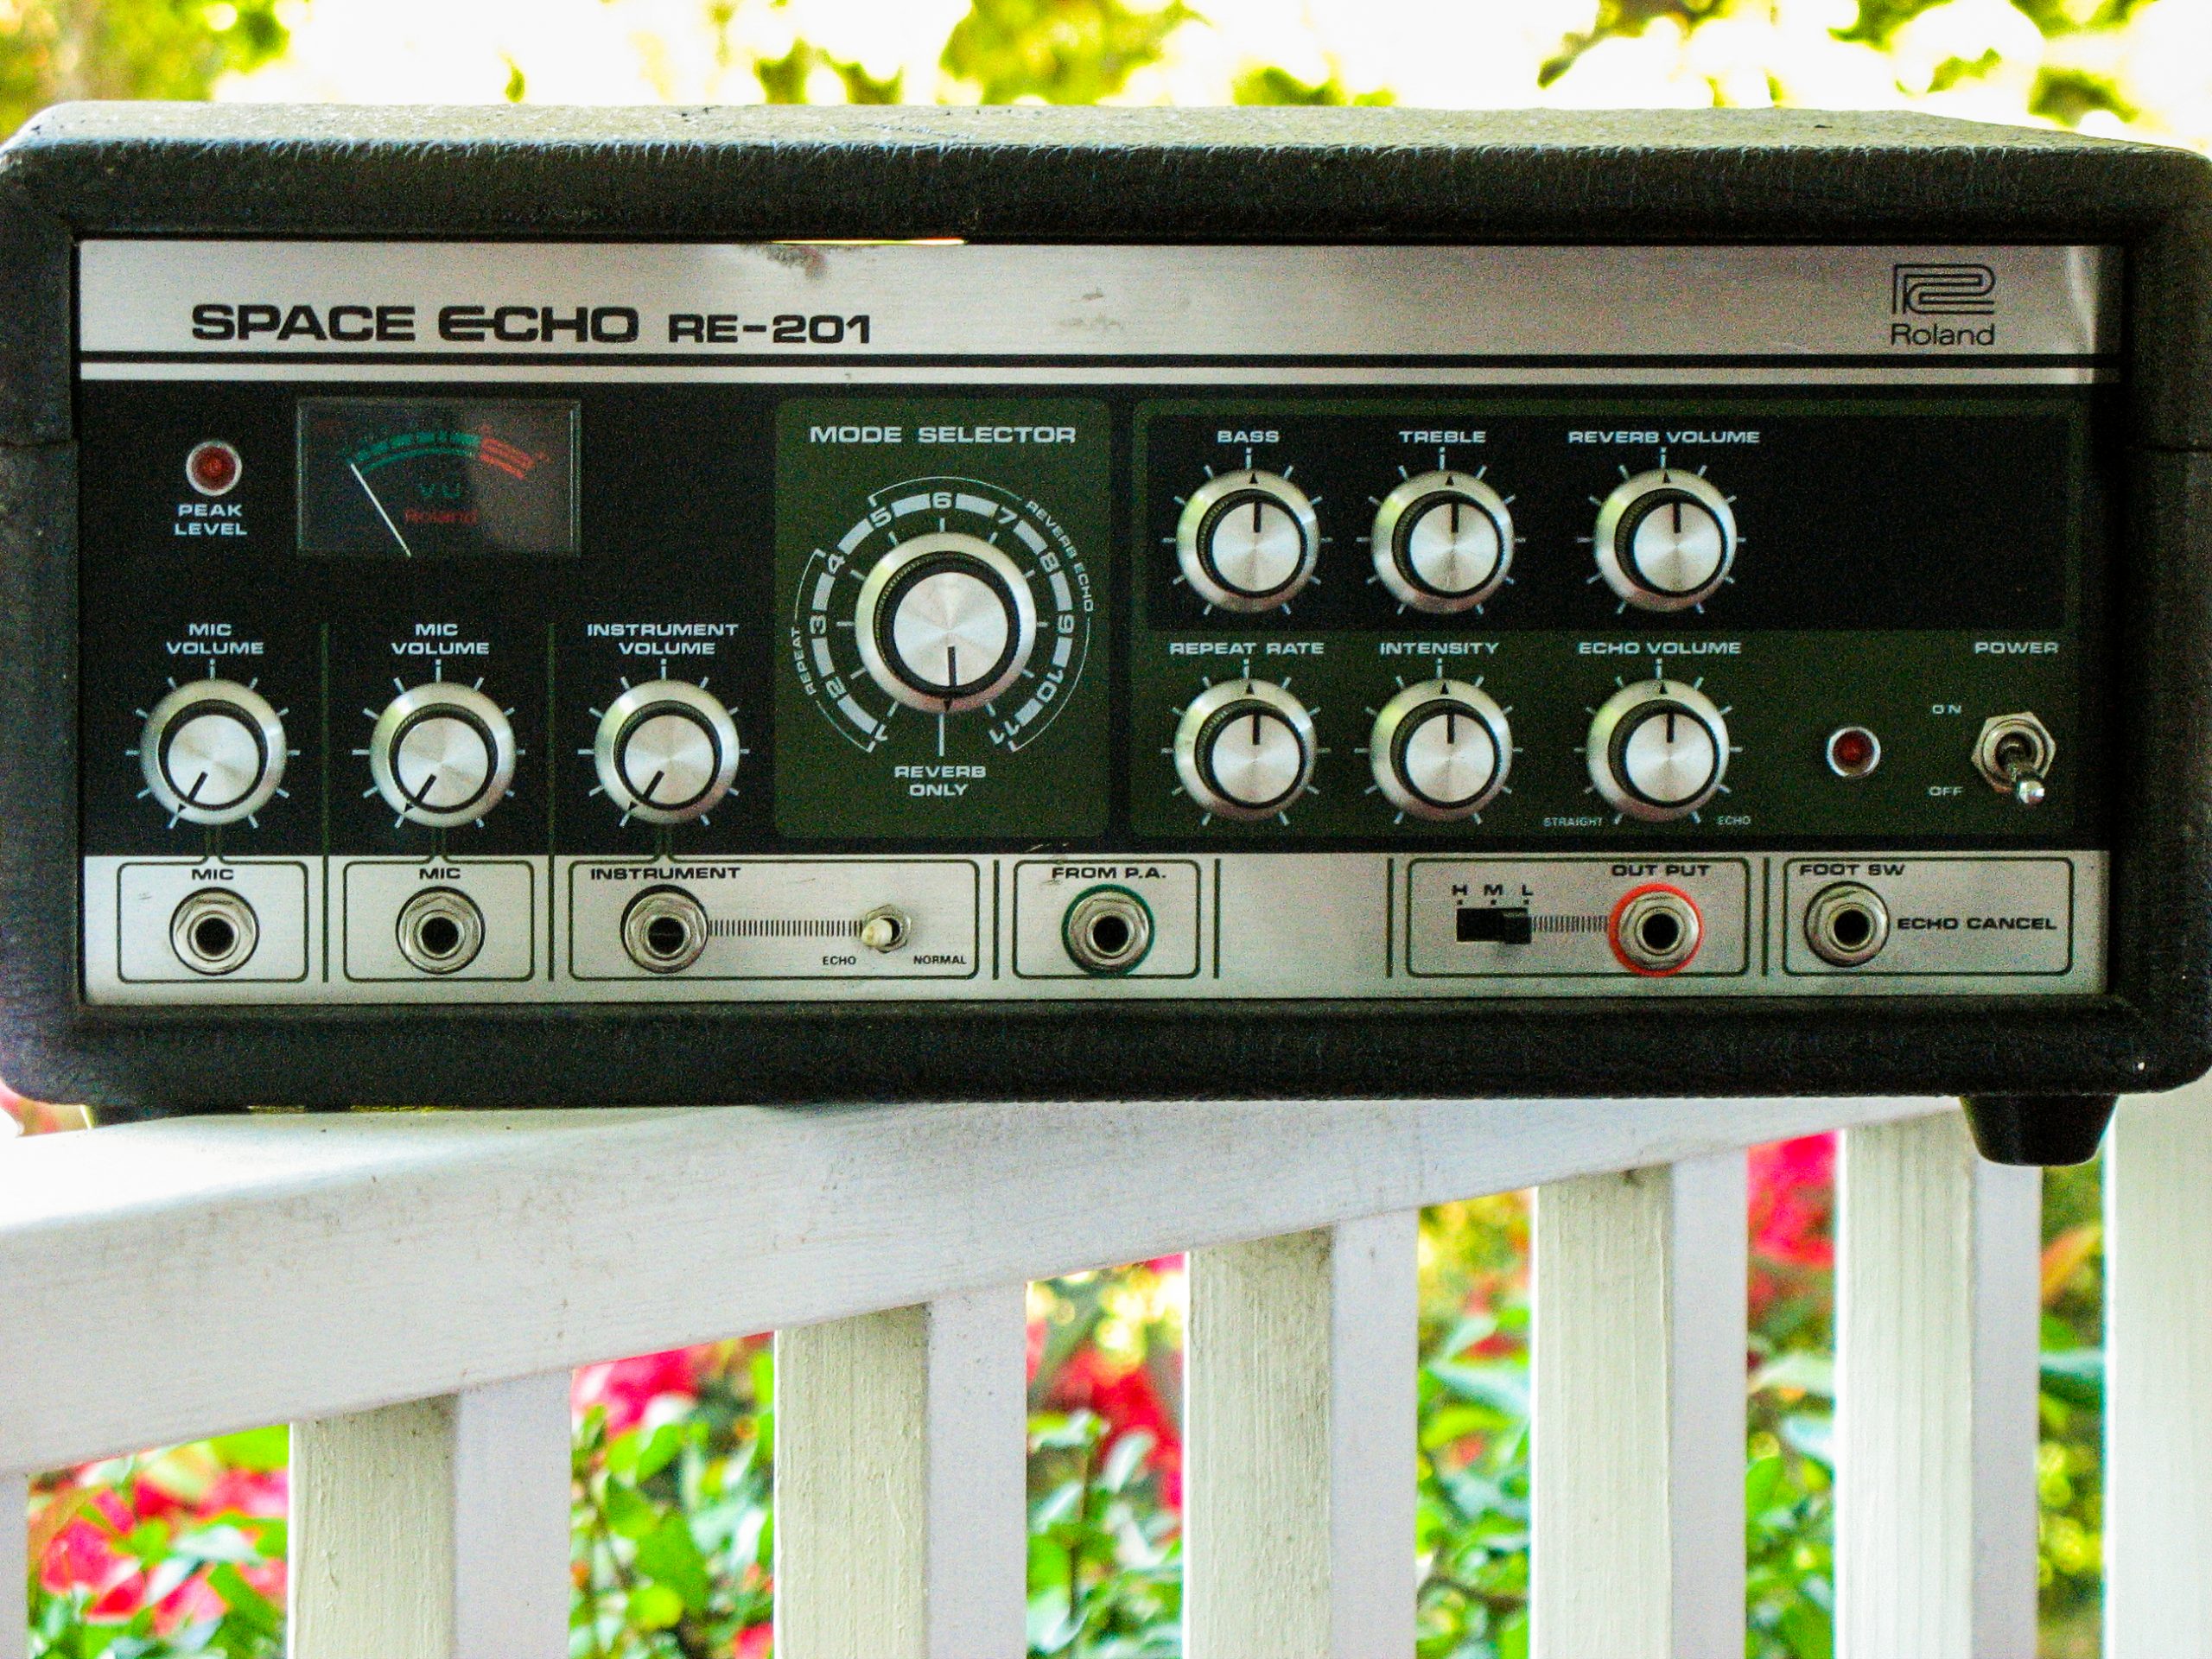 RE-201 Space Echo, Photo by BD James